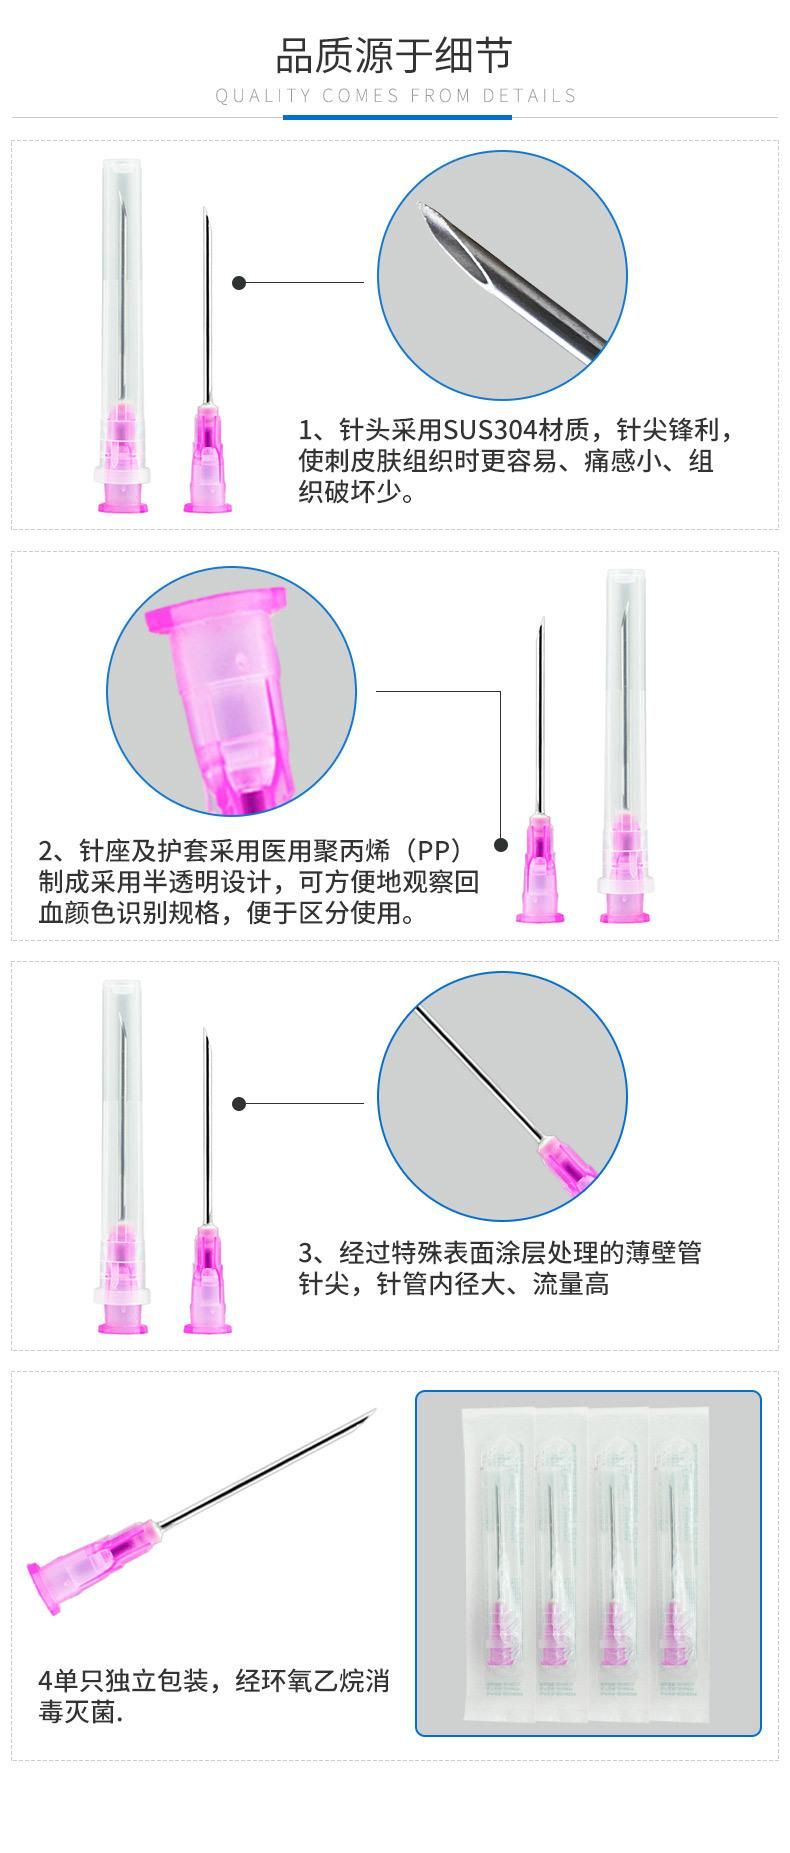 Disposable Medical Sterile Injection Needle 0.7mm*31mm Medical Syringe Needle Needle Device